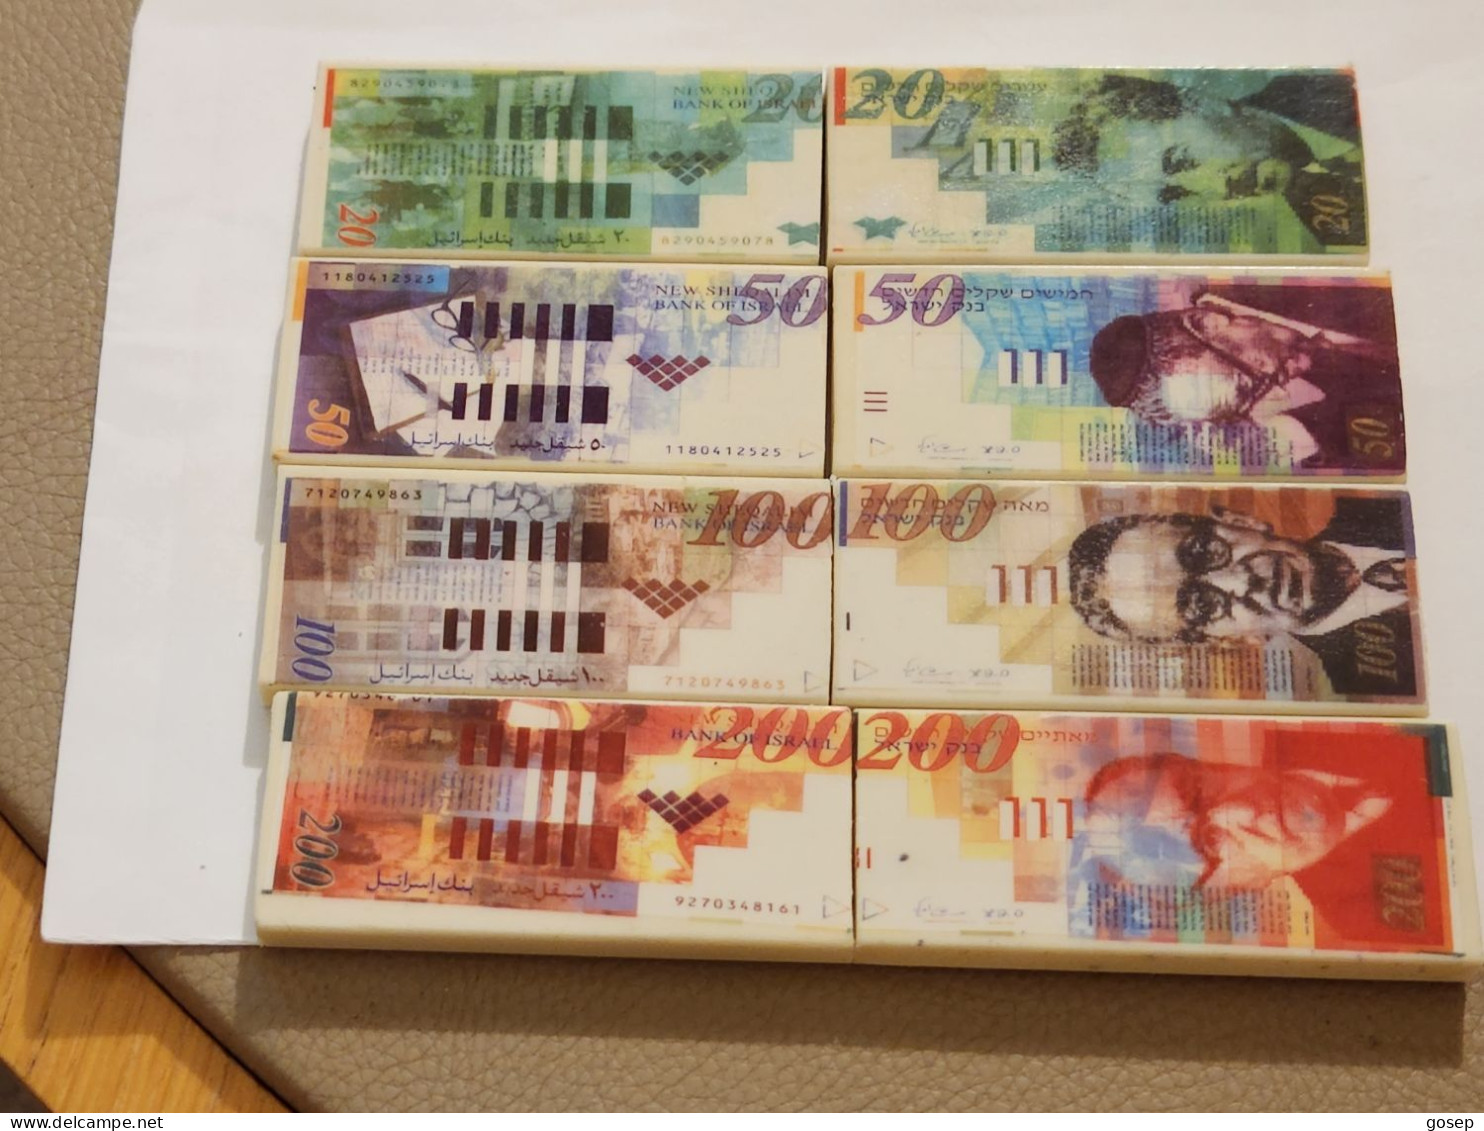 ISRAEL-An Eraser That Erases After Writing In Pencil - The Eraser Has Pictures Of Israeli Banknotes On Both Sides-4note - Israël